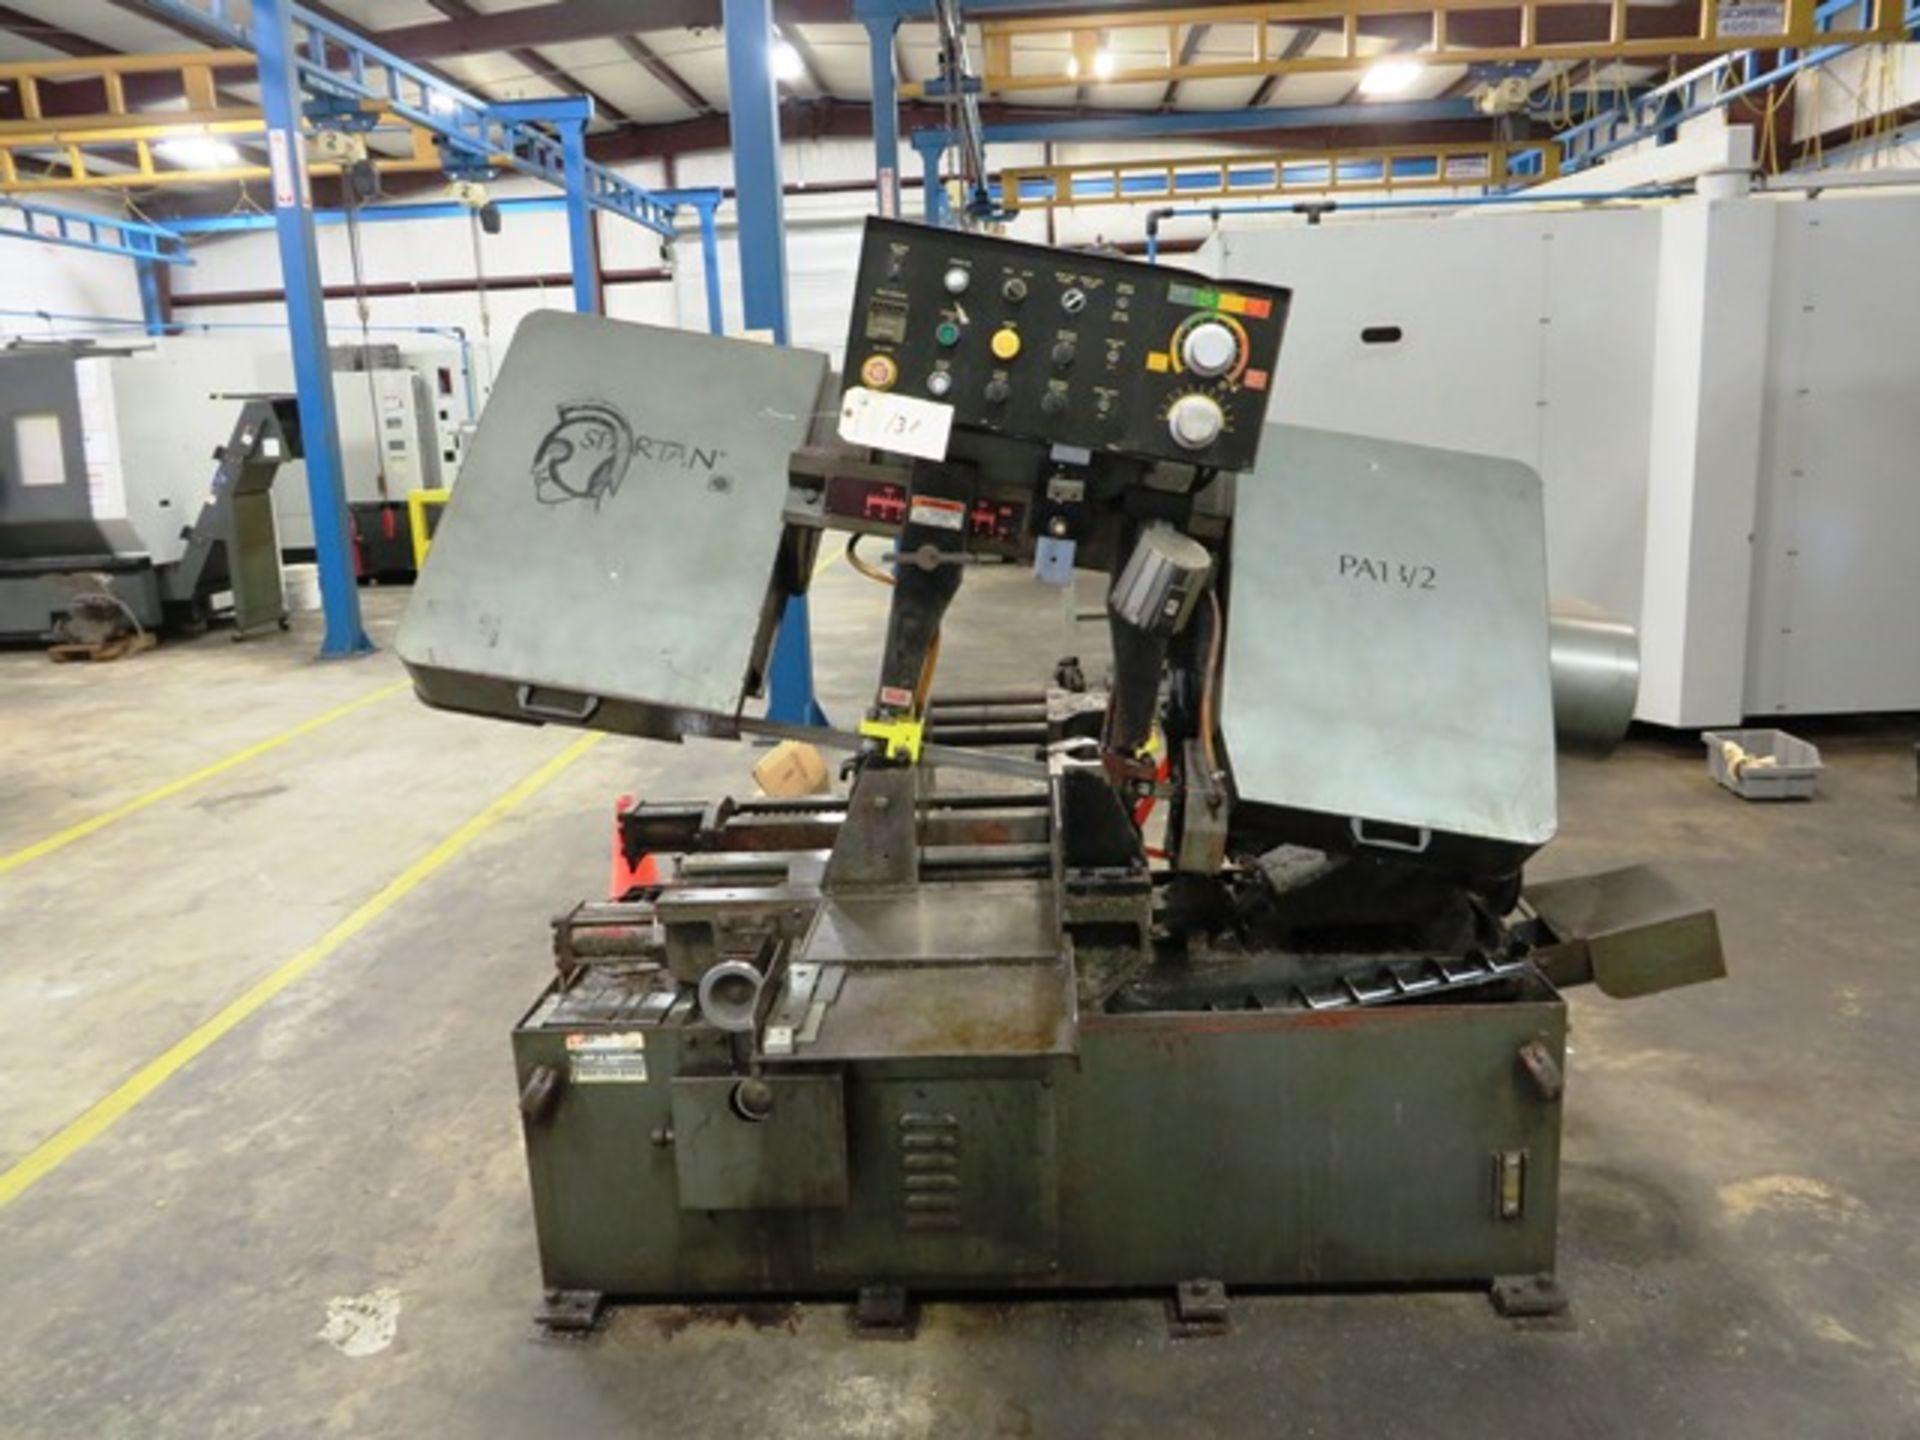 Marvel Spartan Series PA 13/2 Fully Automatic Horizontal Band Saw